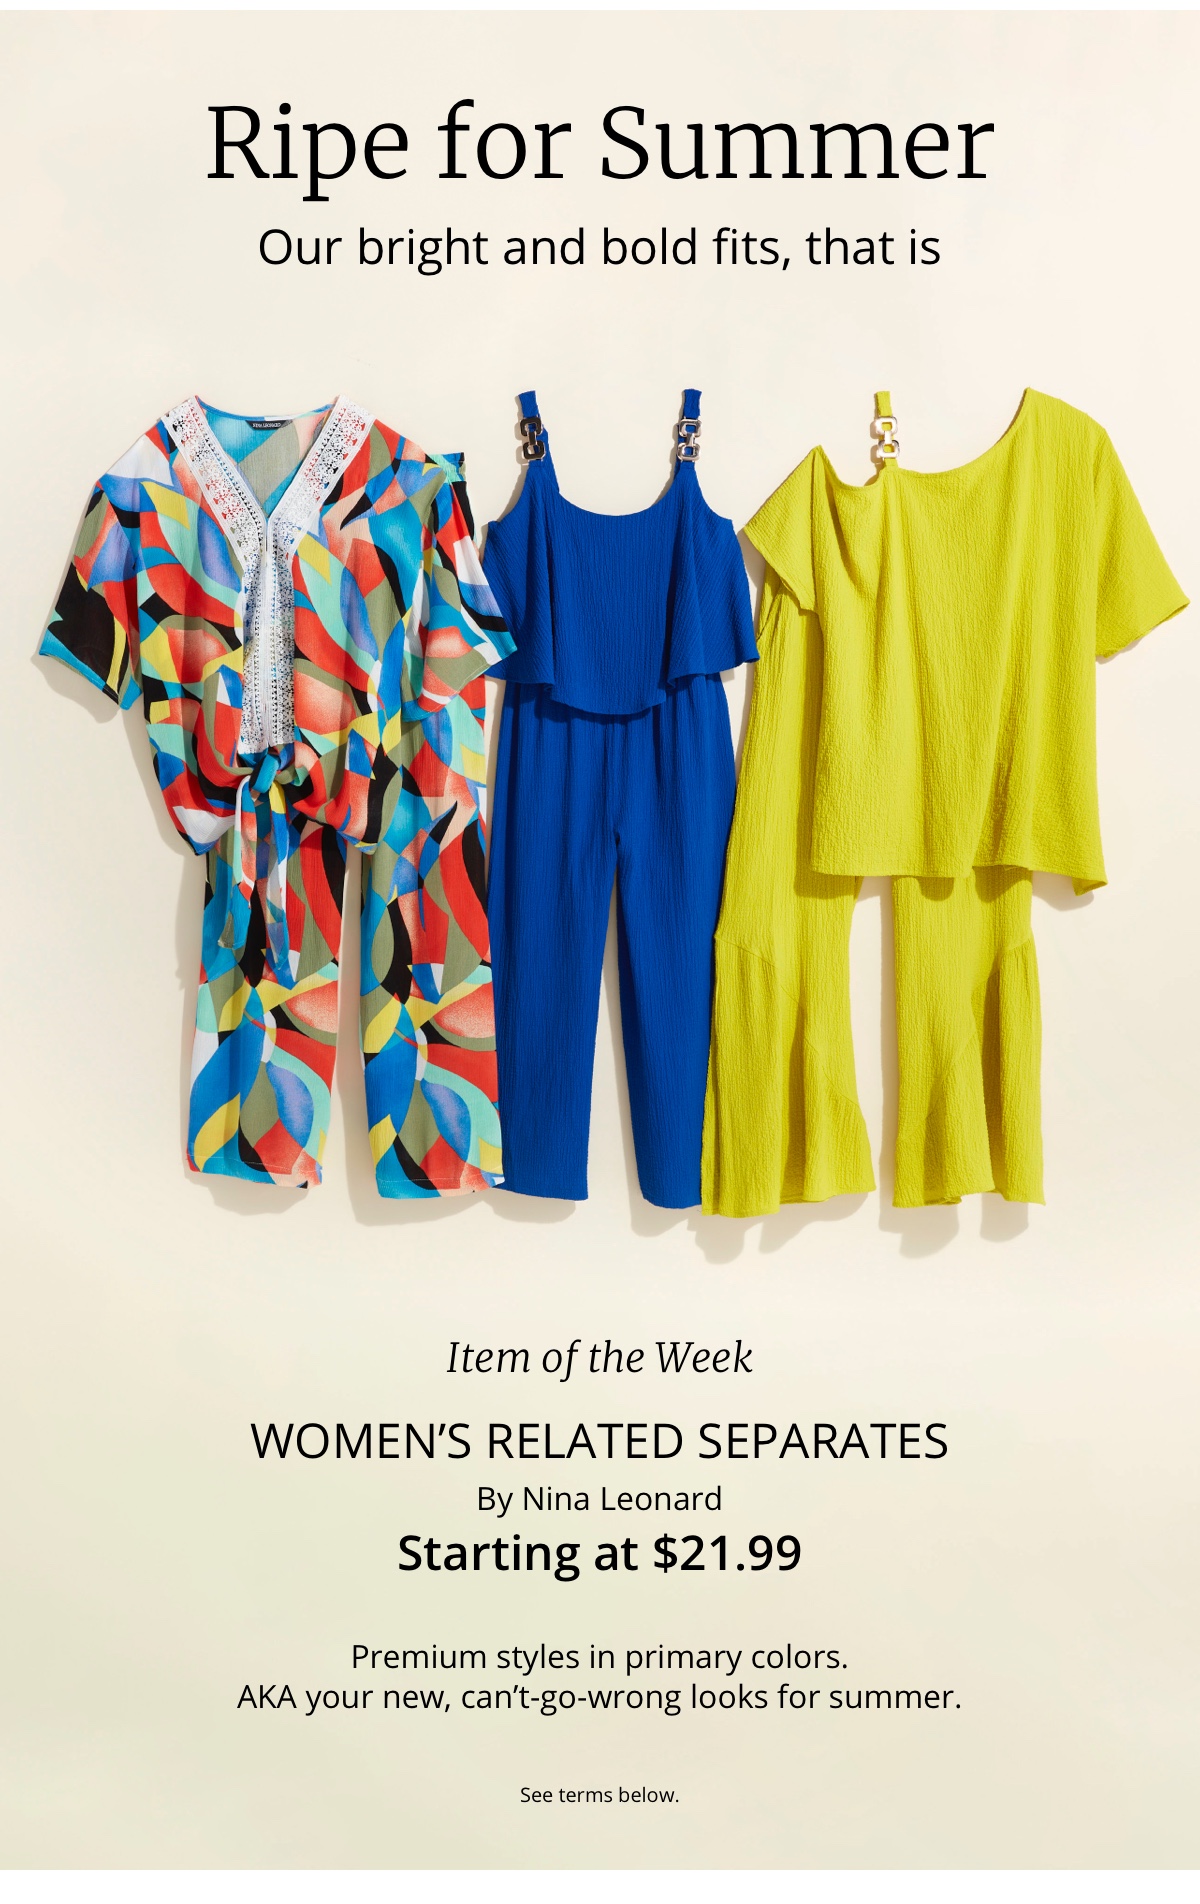 Ripe for Summer|Our bright and bold fits, that is|Item of the Week|Womens Related Separates|By Nina Leonard|Starting at $21.99|Premium styles in primary colors.| AKA your new, cant-go-wrong looks for summer.See terms below.